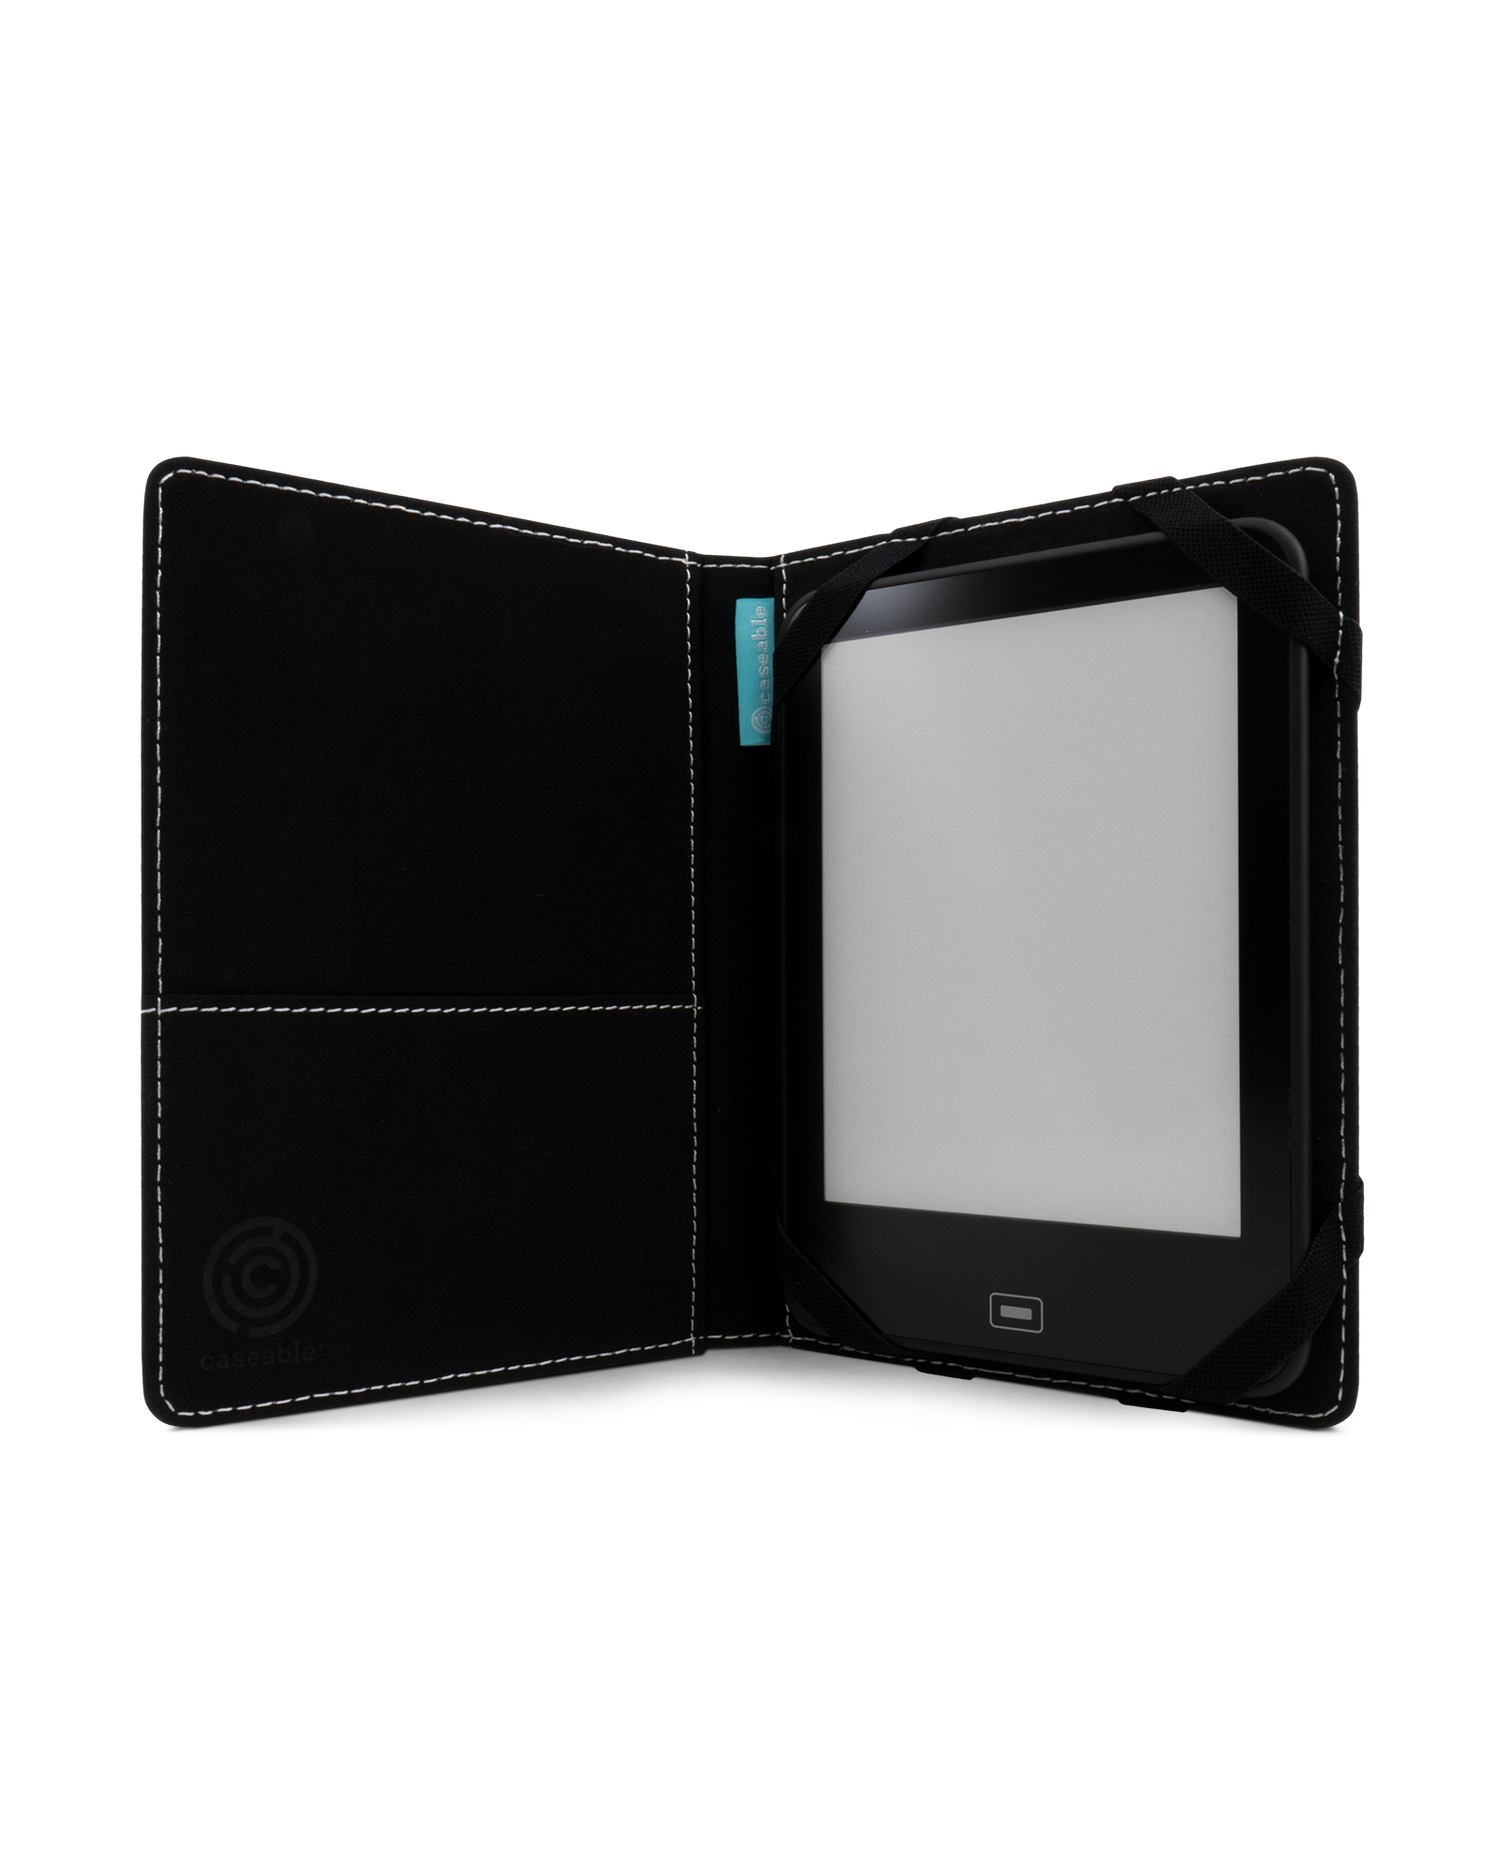 Turquoise Ripples eReader Case S: Opened interior view